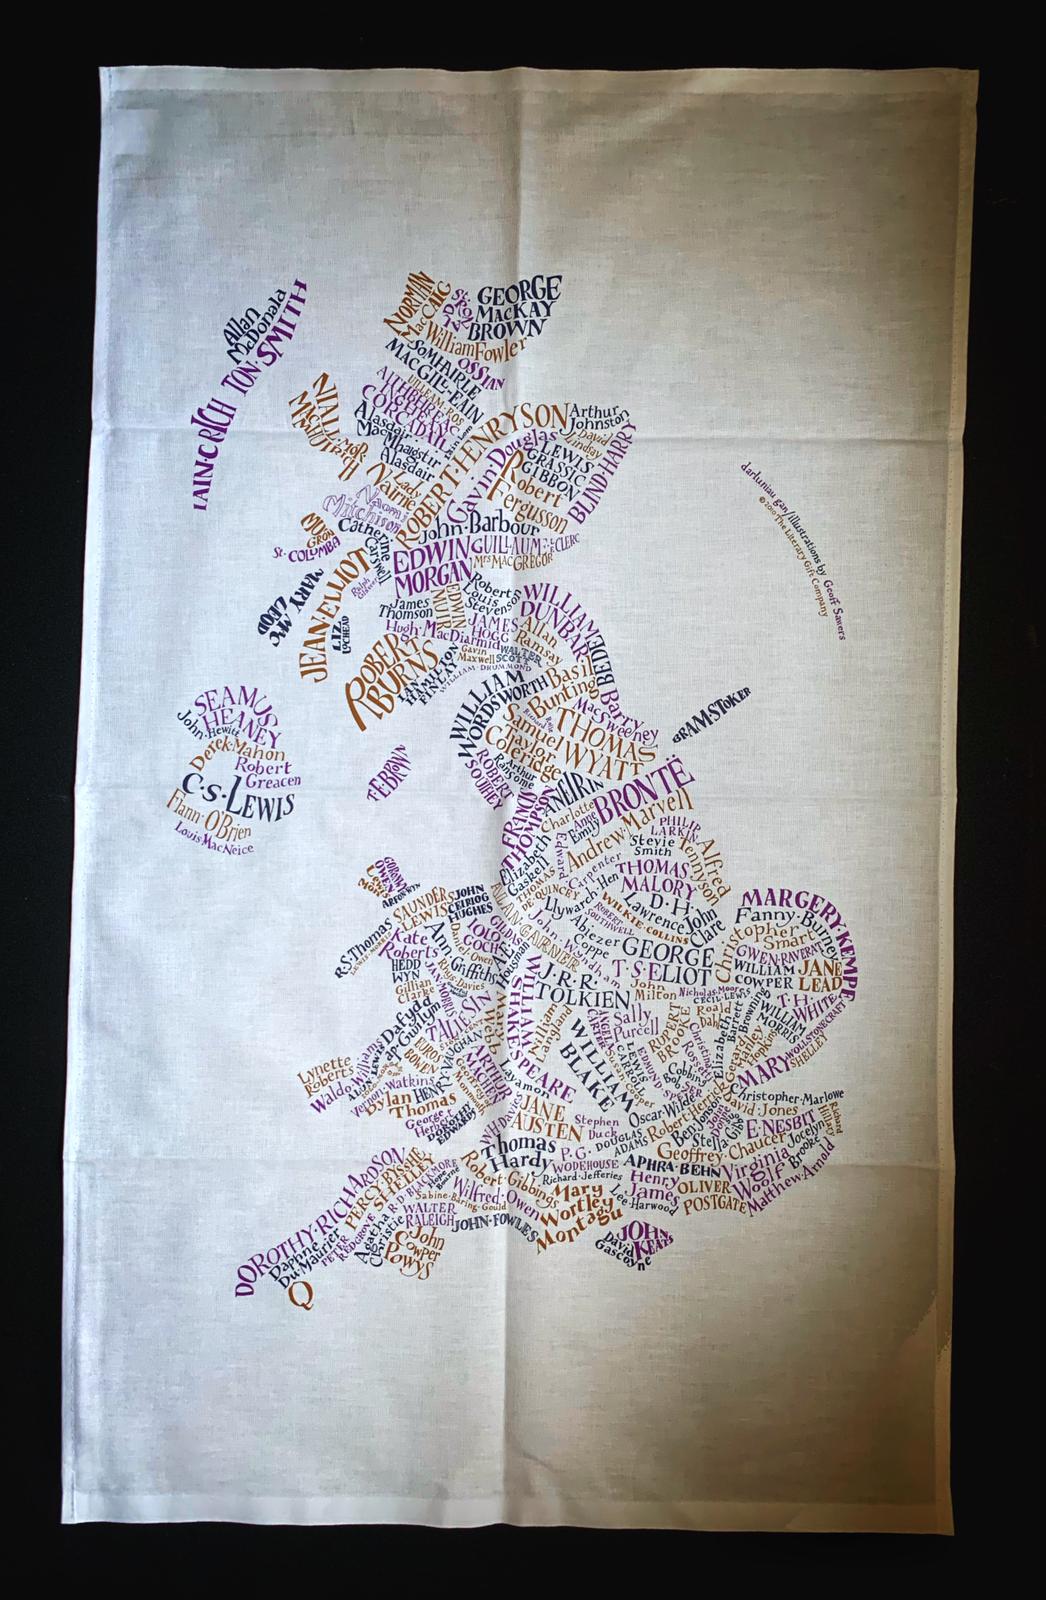 Image shows the Giant Handkerchief unfolded to display design printed in purple, orange and slate grey on white cotton tea towel.  Design shows a literary map of Britain with names of famous authors shaped in and around the areas where they lived.